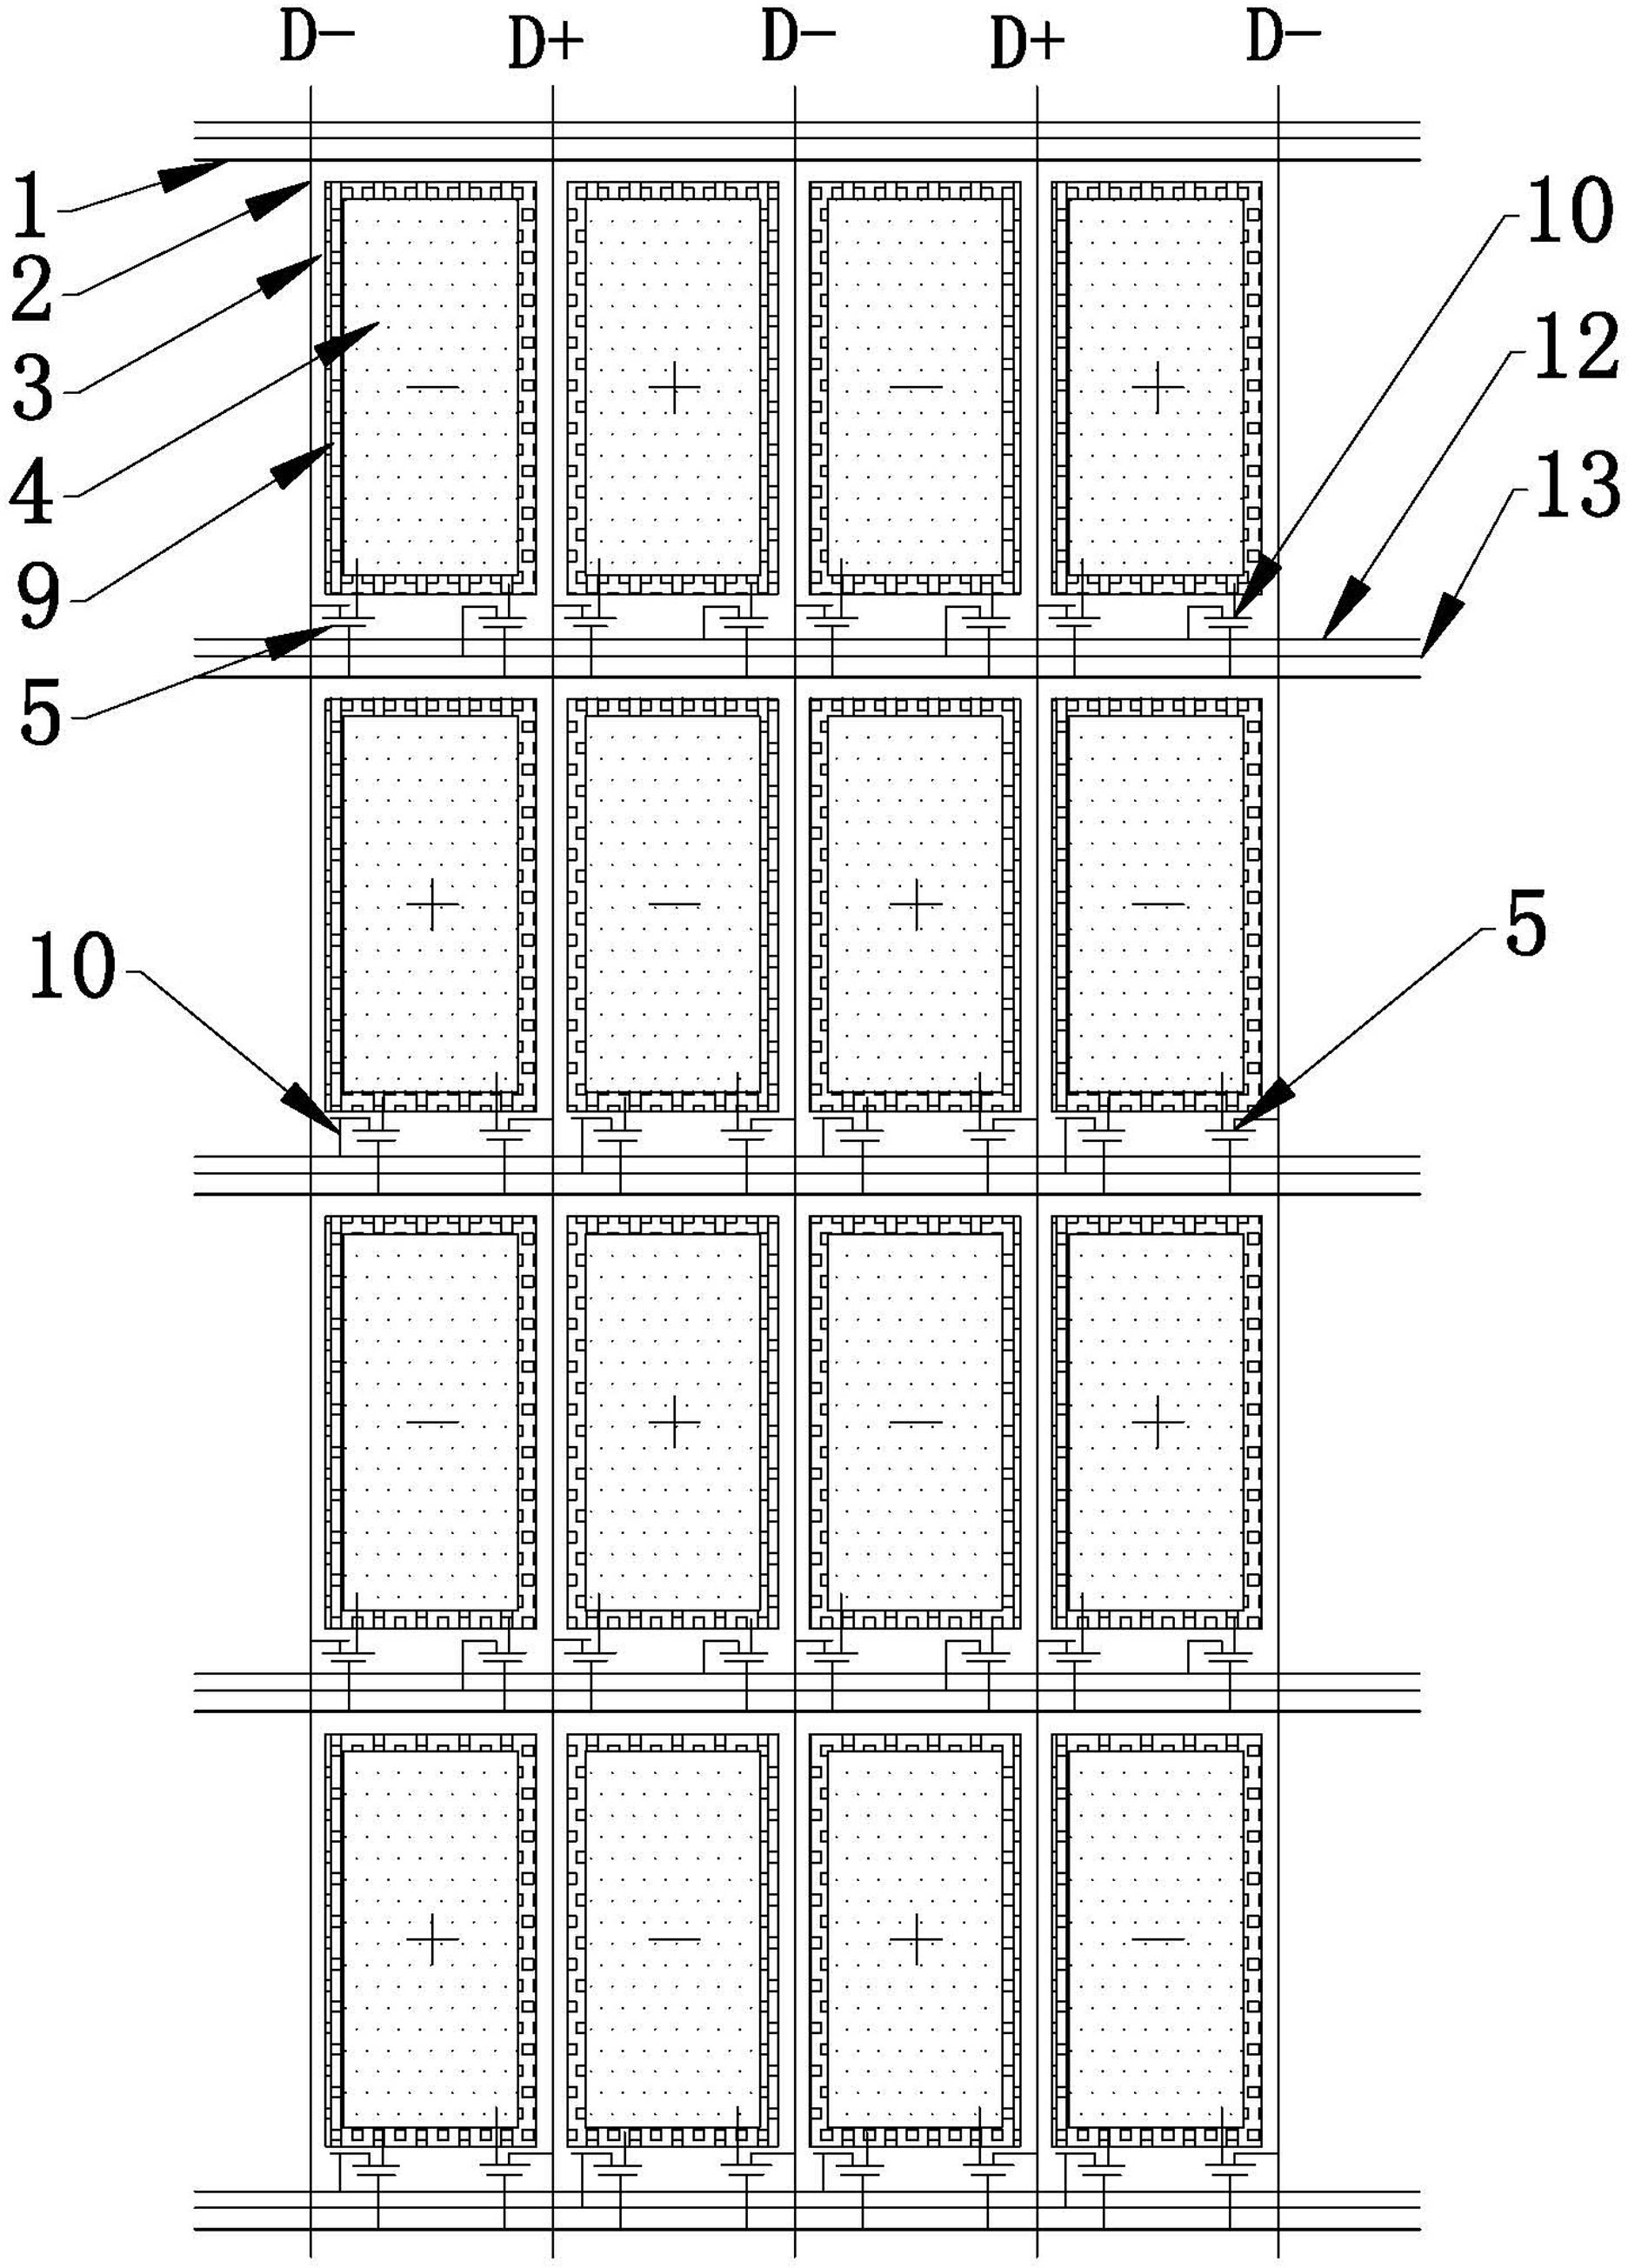 Pixel structure of blue-phase liquid crystal display